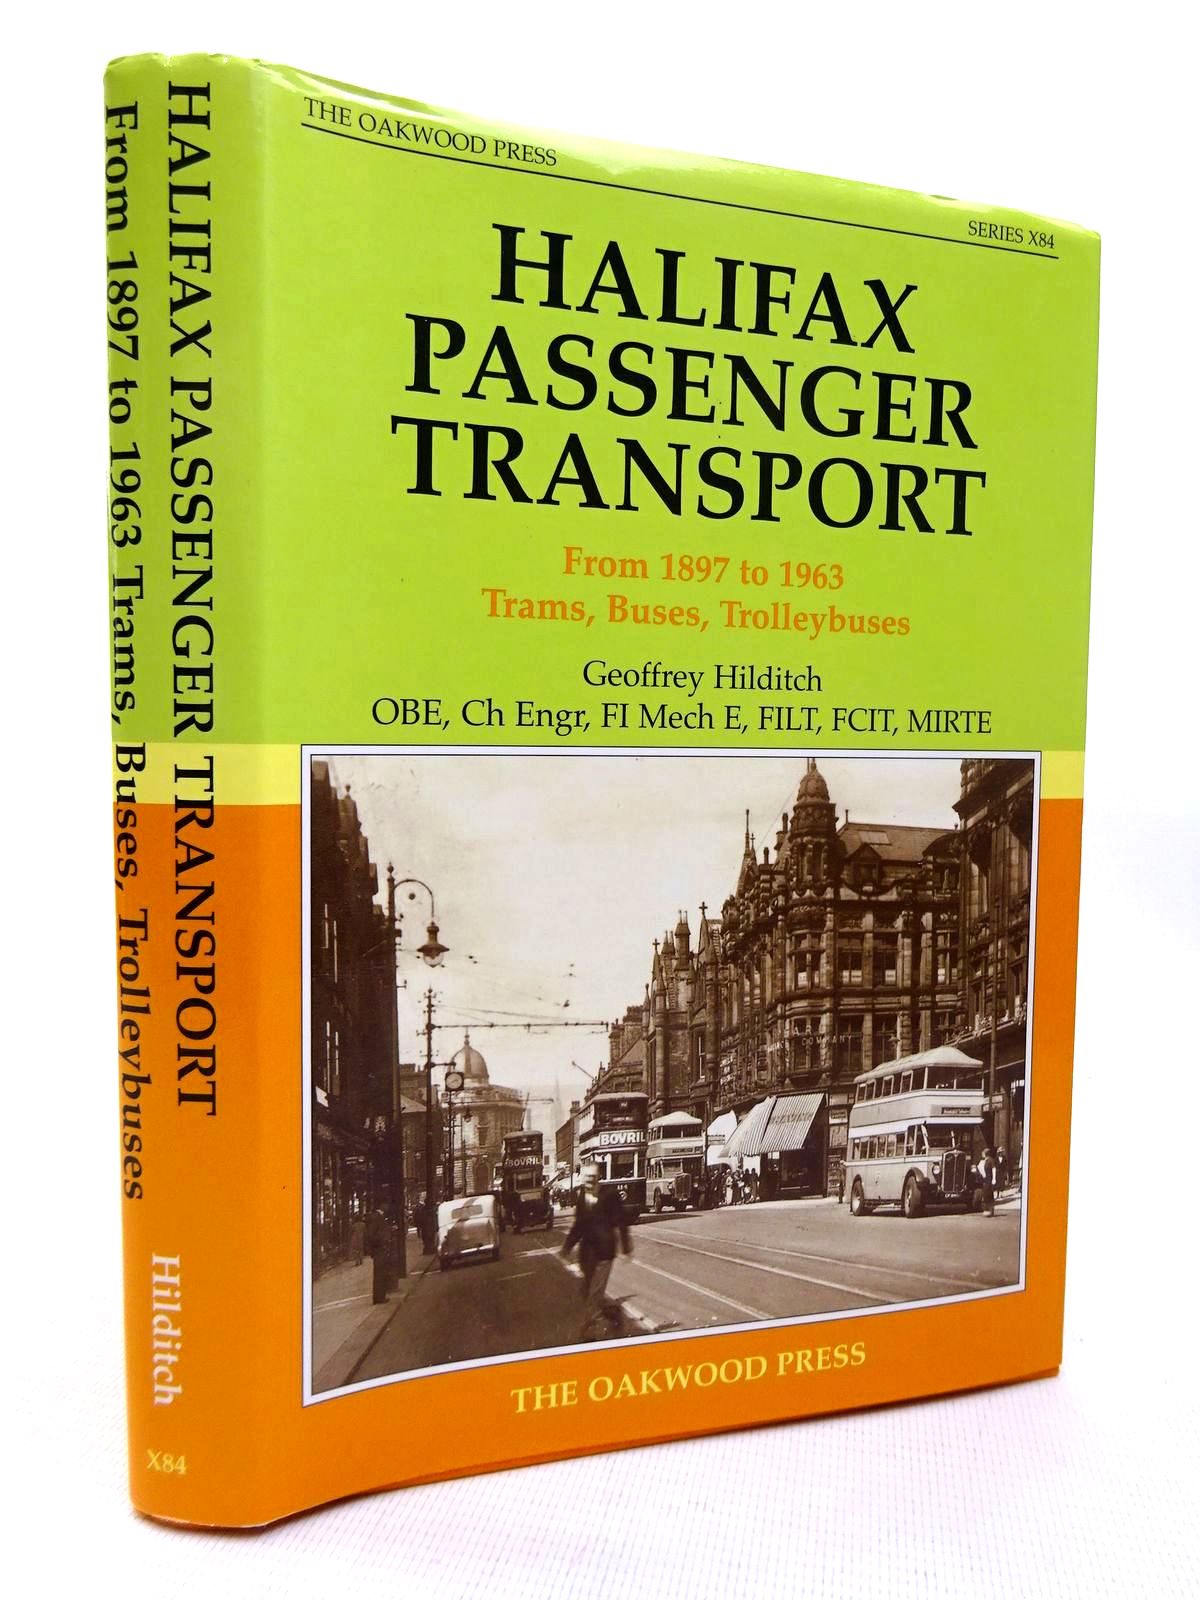 Photo of HALIFAX PASSENGER TRANSPORT FROM 1897 TO 1963 TRAMS, BUSES, TROLLEYBUSES written by Hilditch, Geoffrey published by The Oakwood Press (STOCK CODE: 1816367)  for sale by Stella & Rose's Books